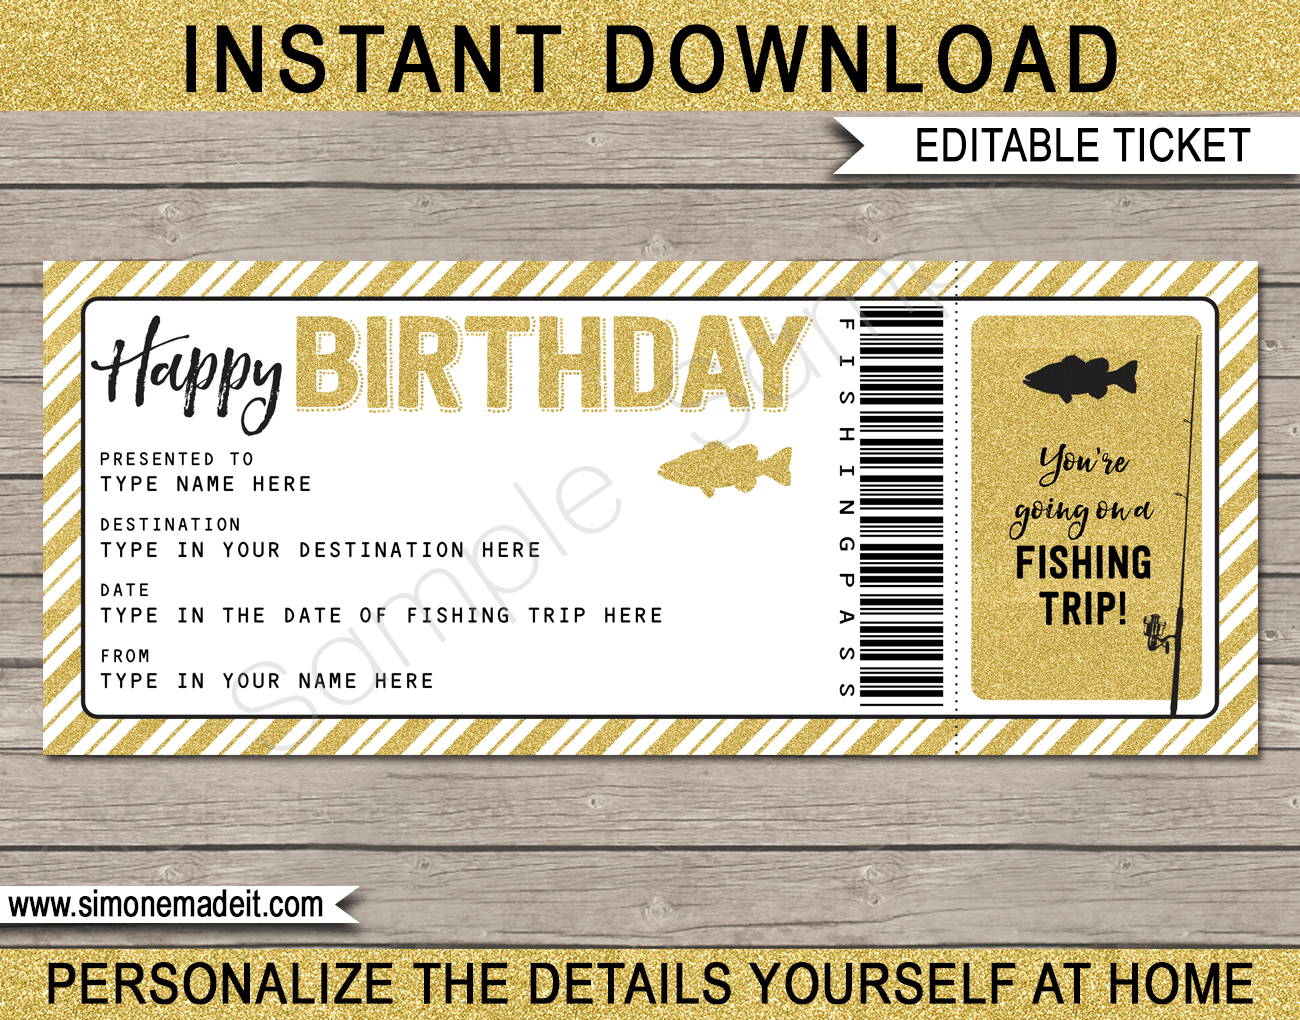 Birthday Fishing Trip Ticket Gift Voucher Printable Certificate Template